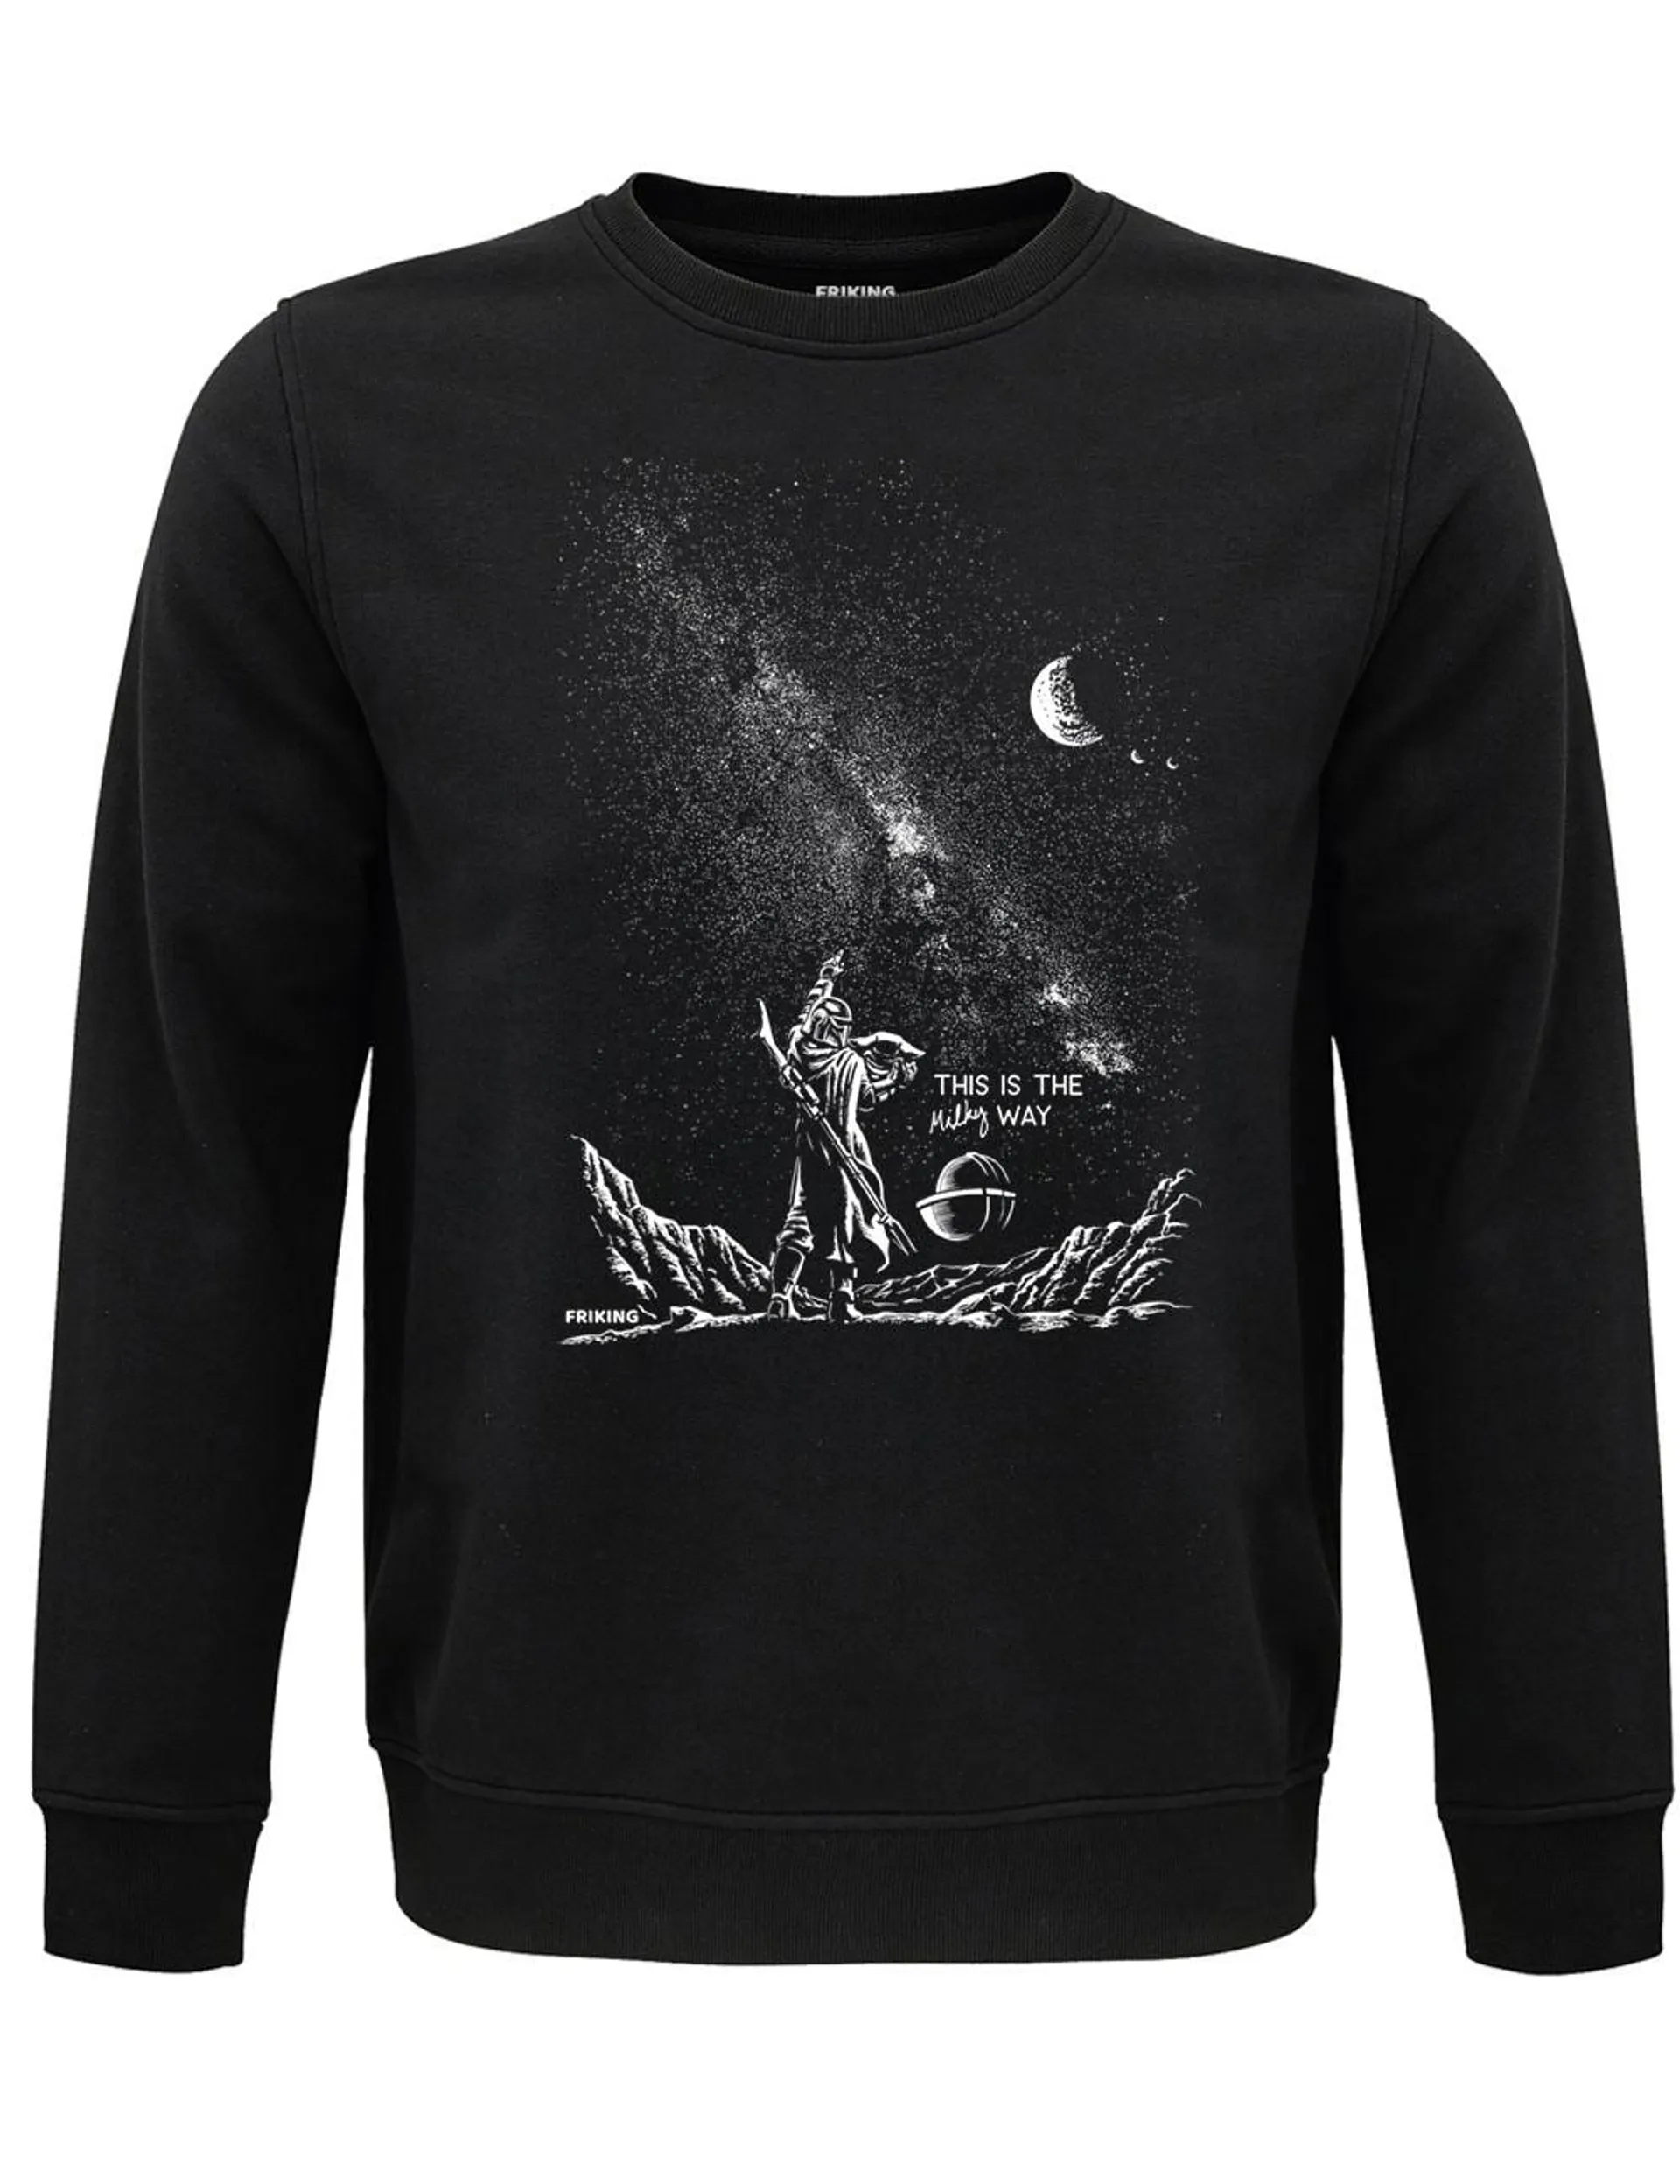 SUDADERA SIN CAPUCHA This is the milky way